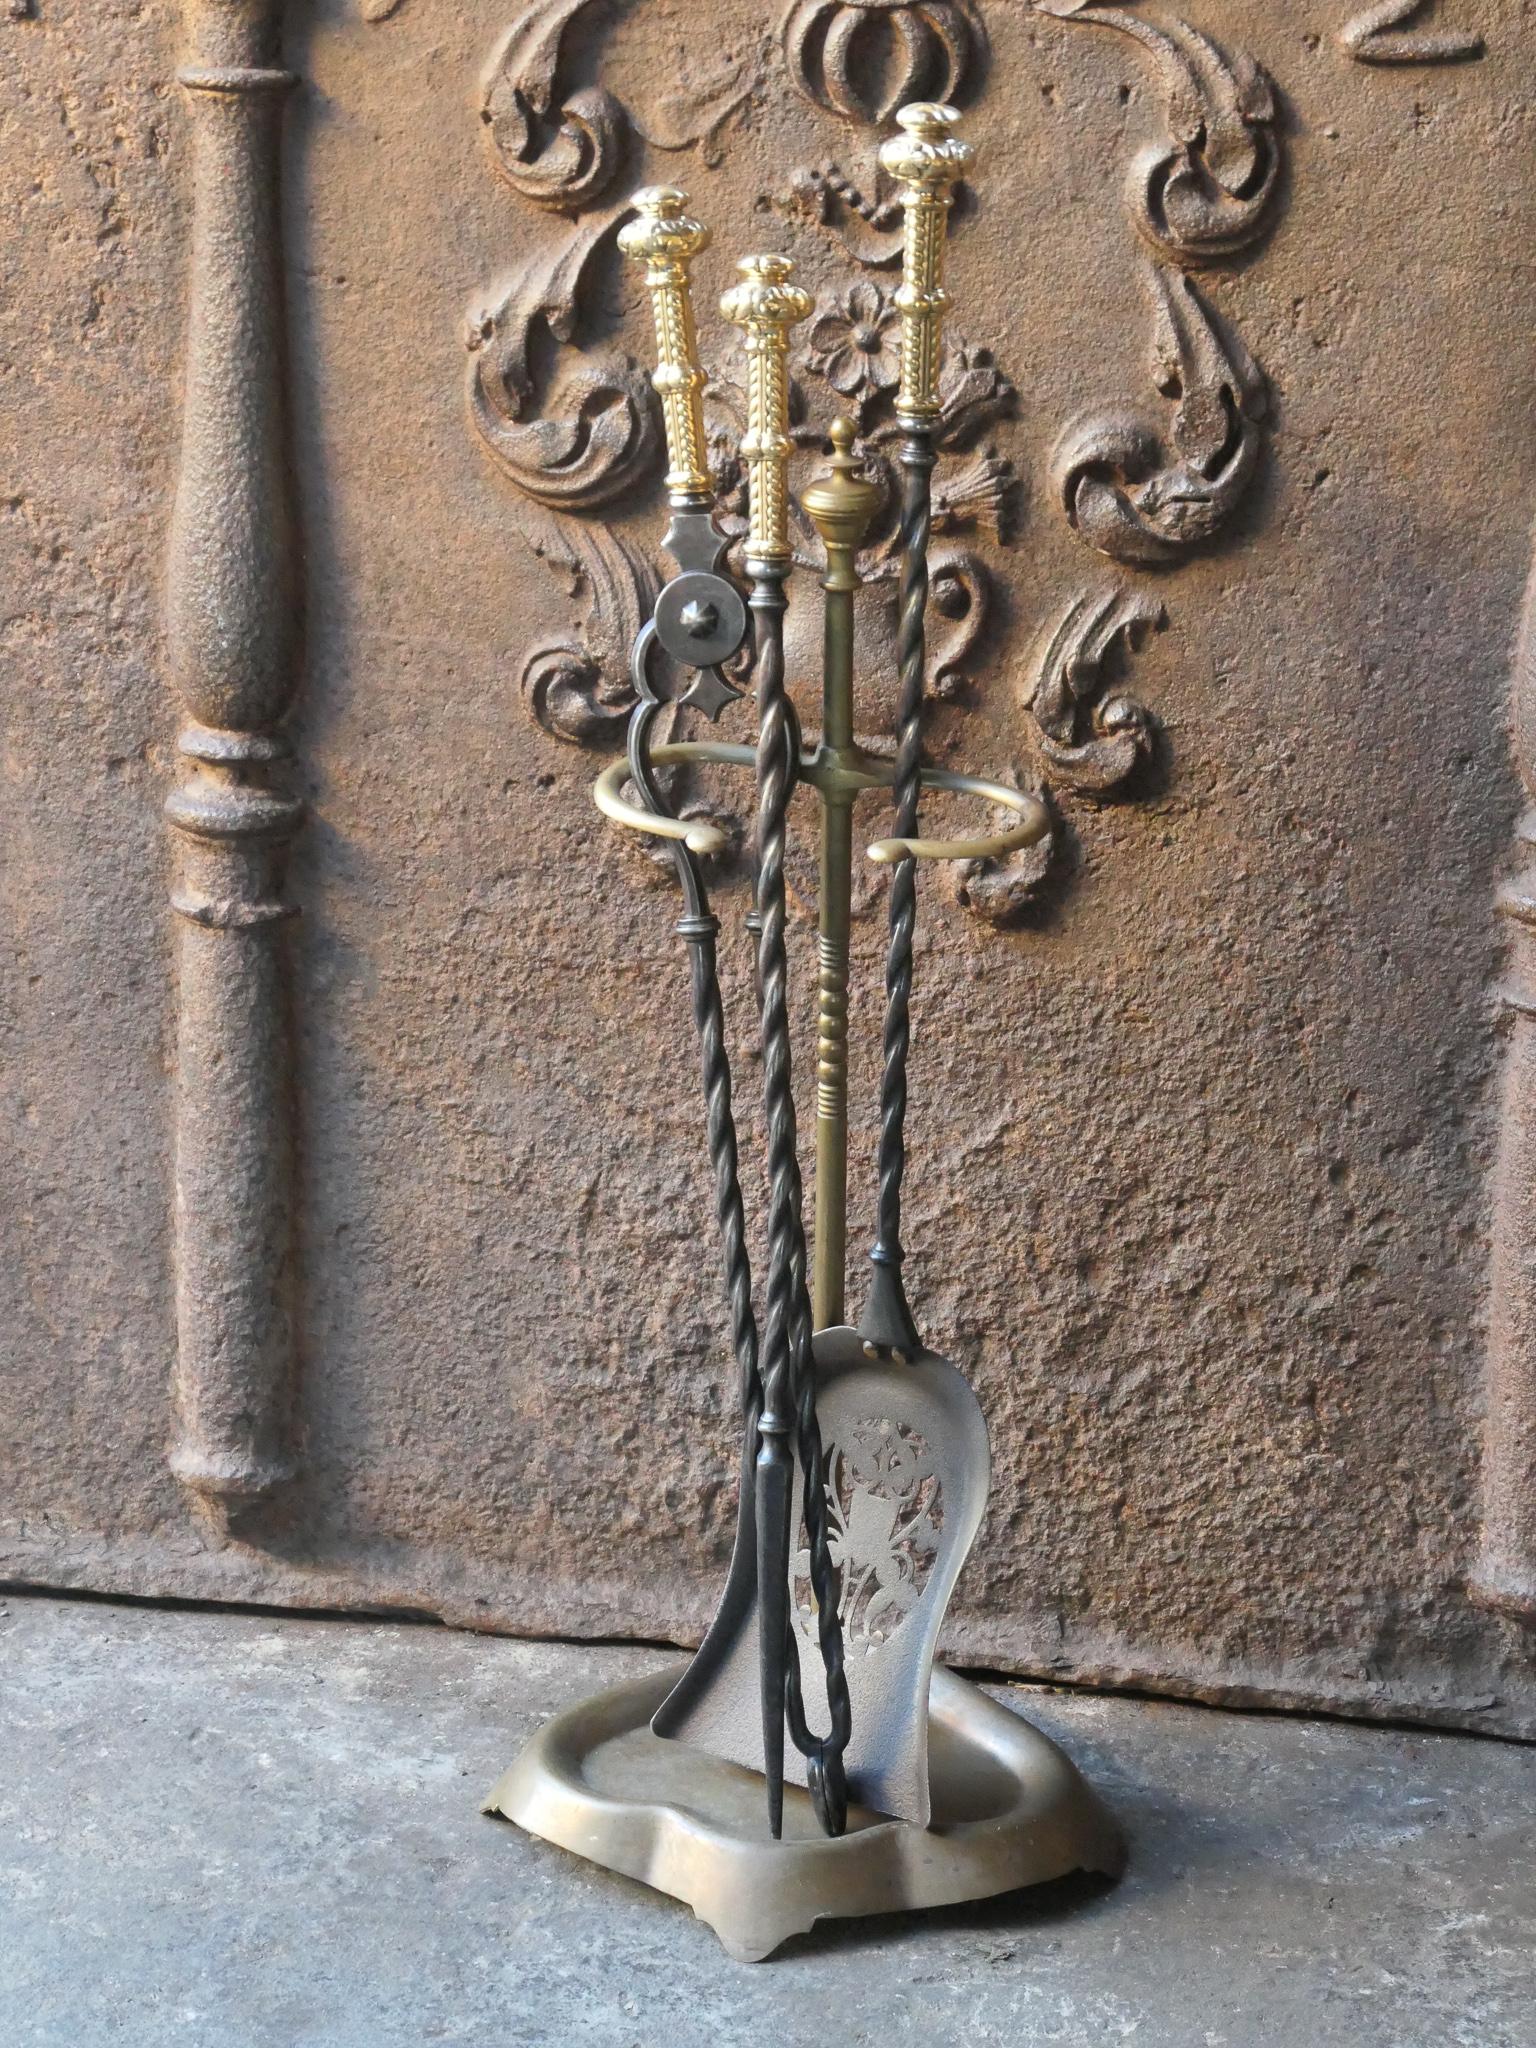 18/19th century English Georgian fireplace tools. The tool set consists of thongs, shovel, poker and stand. Wrought iron tools with polished copper handles and a brass stand. It is in a good condition and is fully functional.